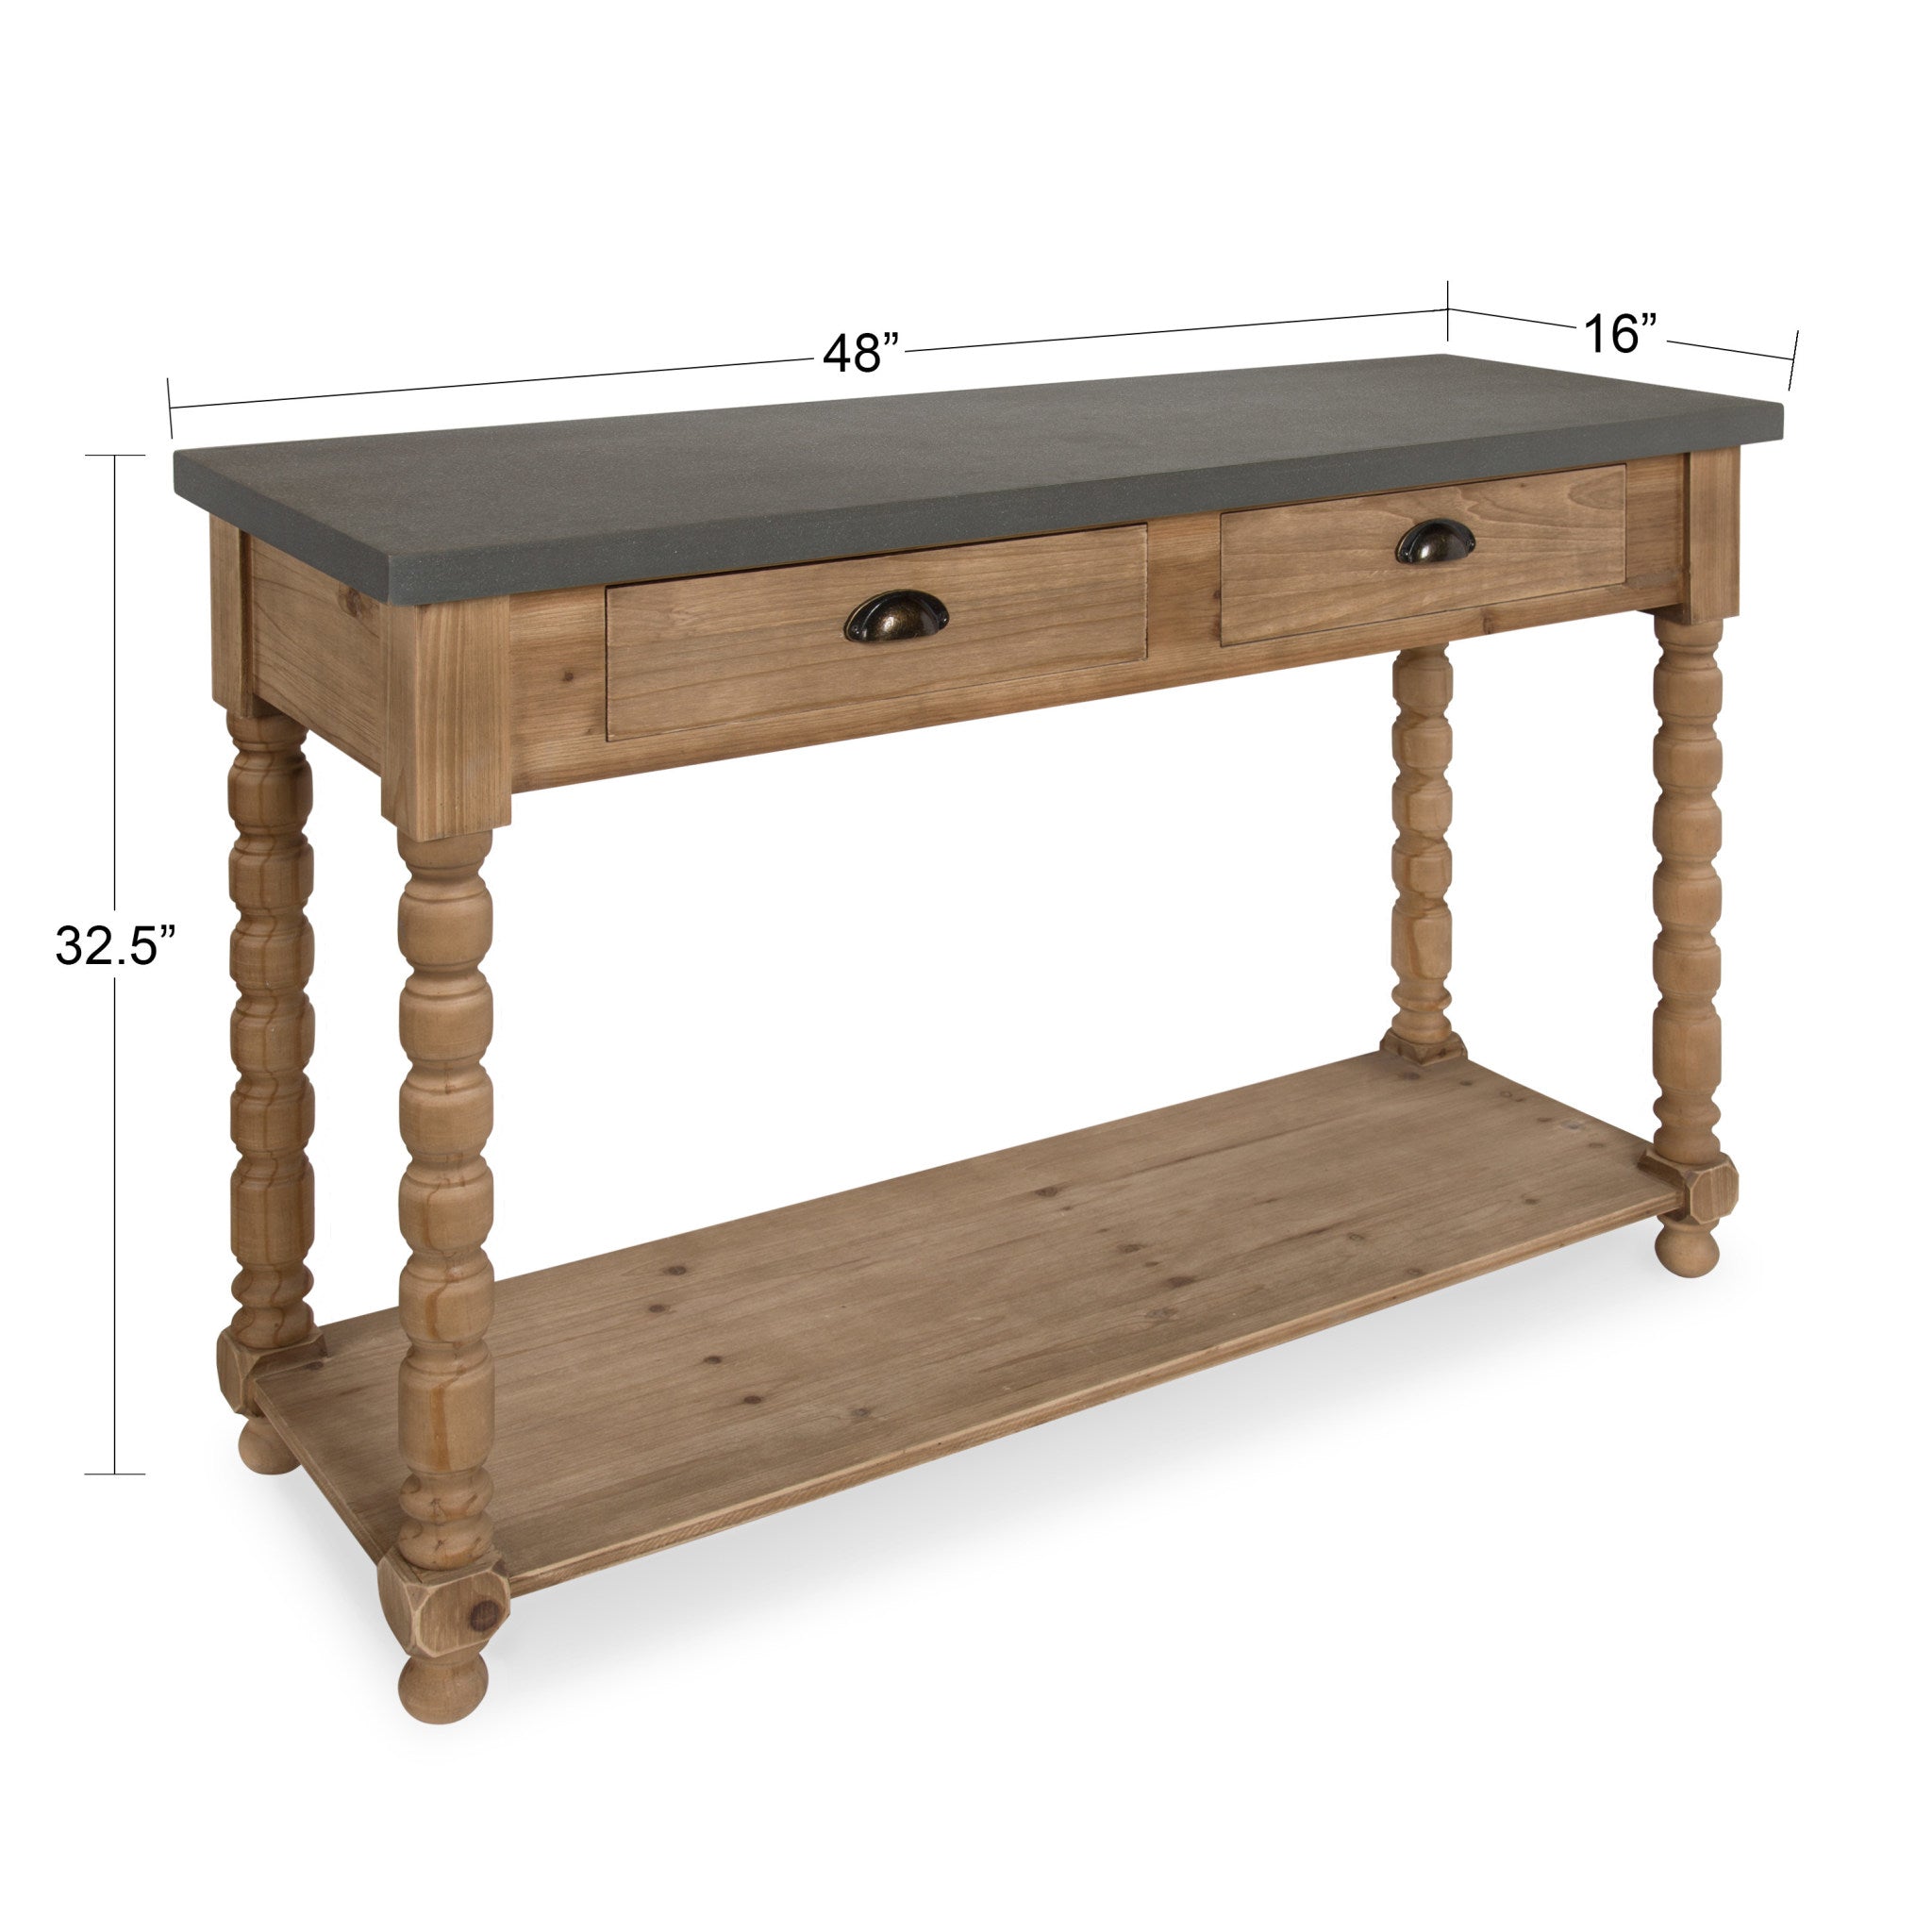 Rutledge Rustic Chic Console Table with Storage